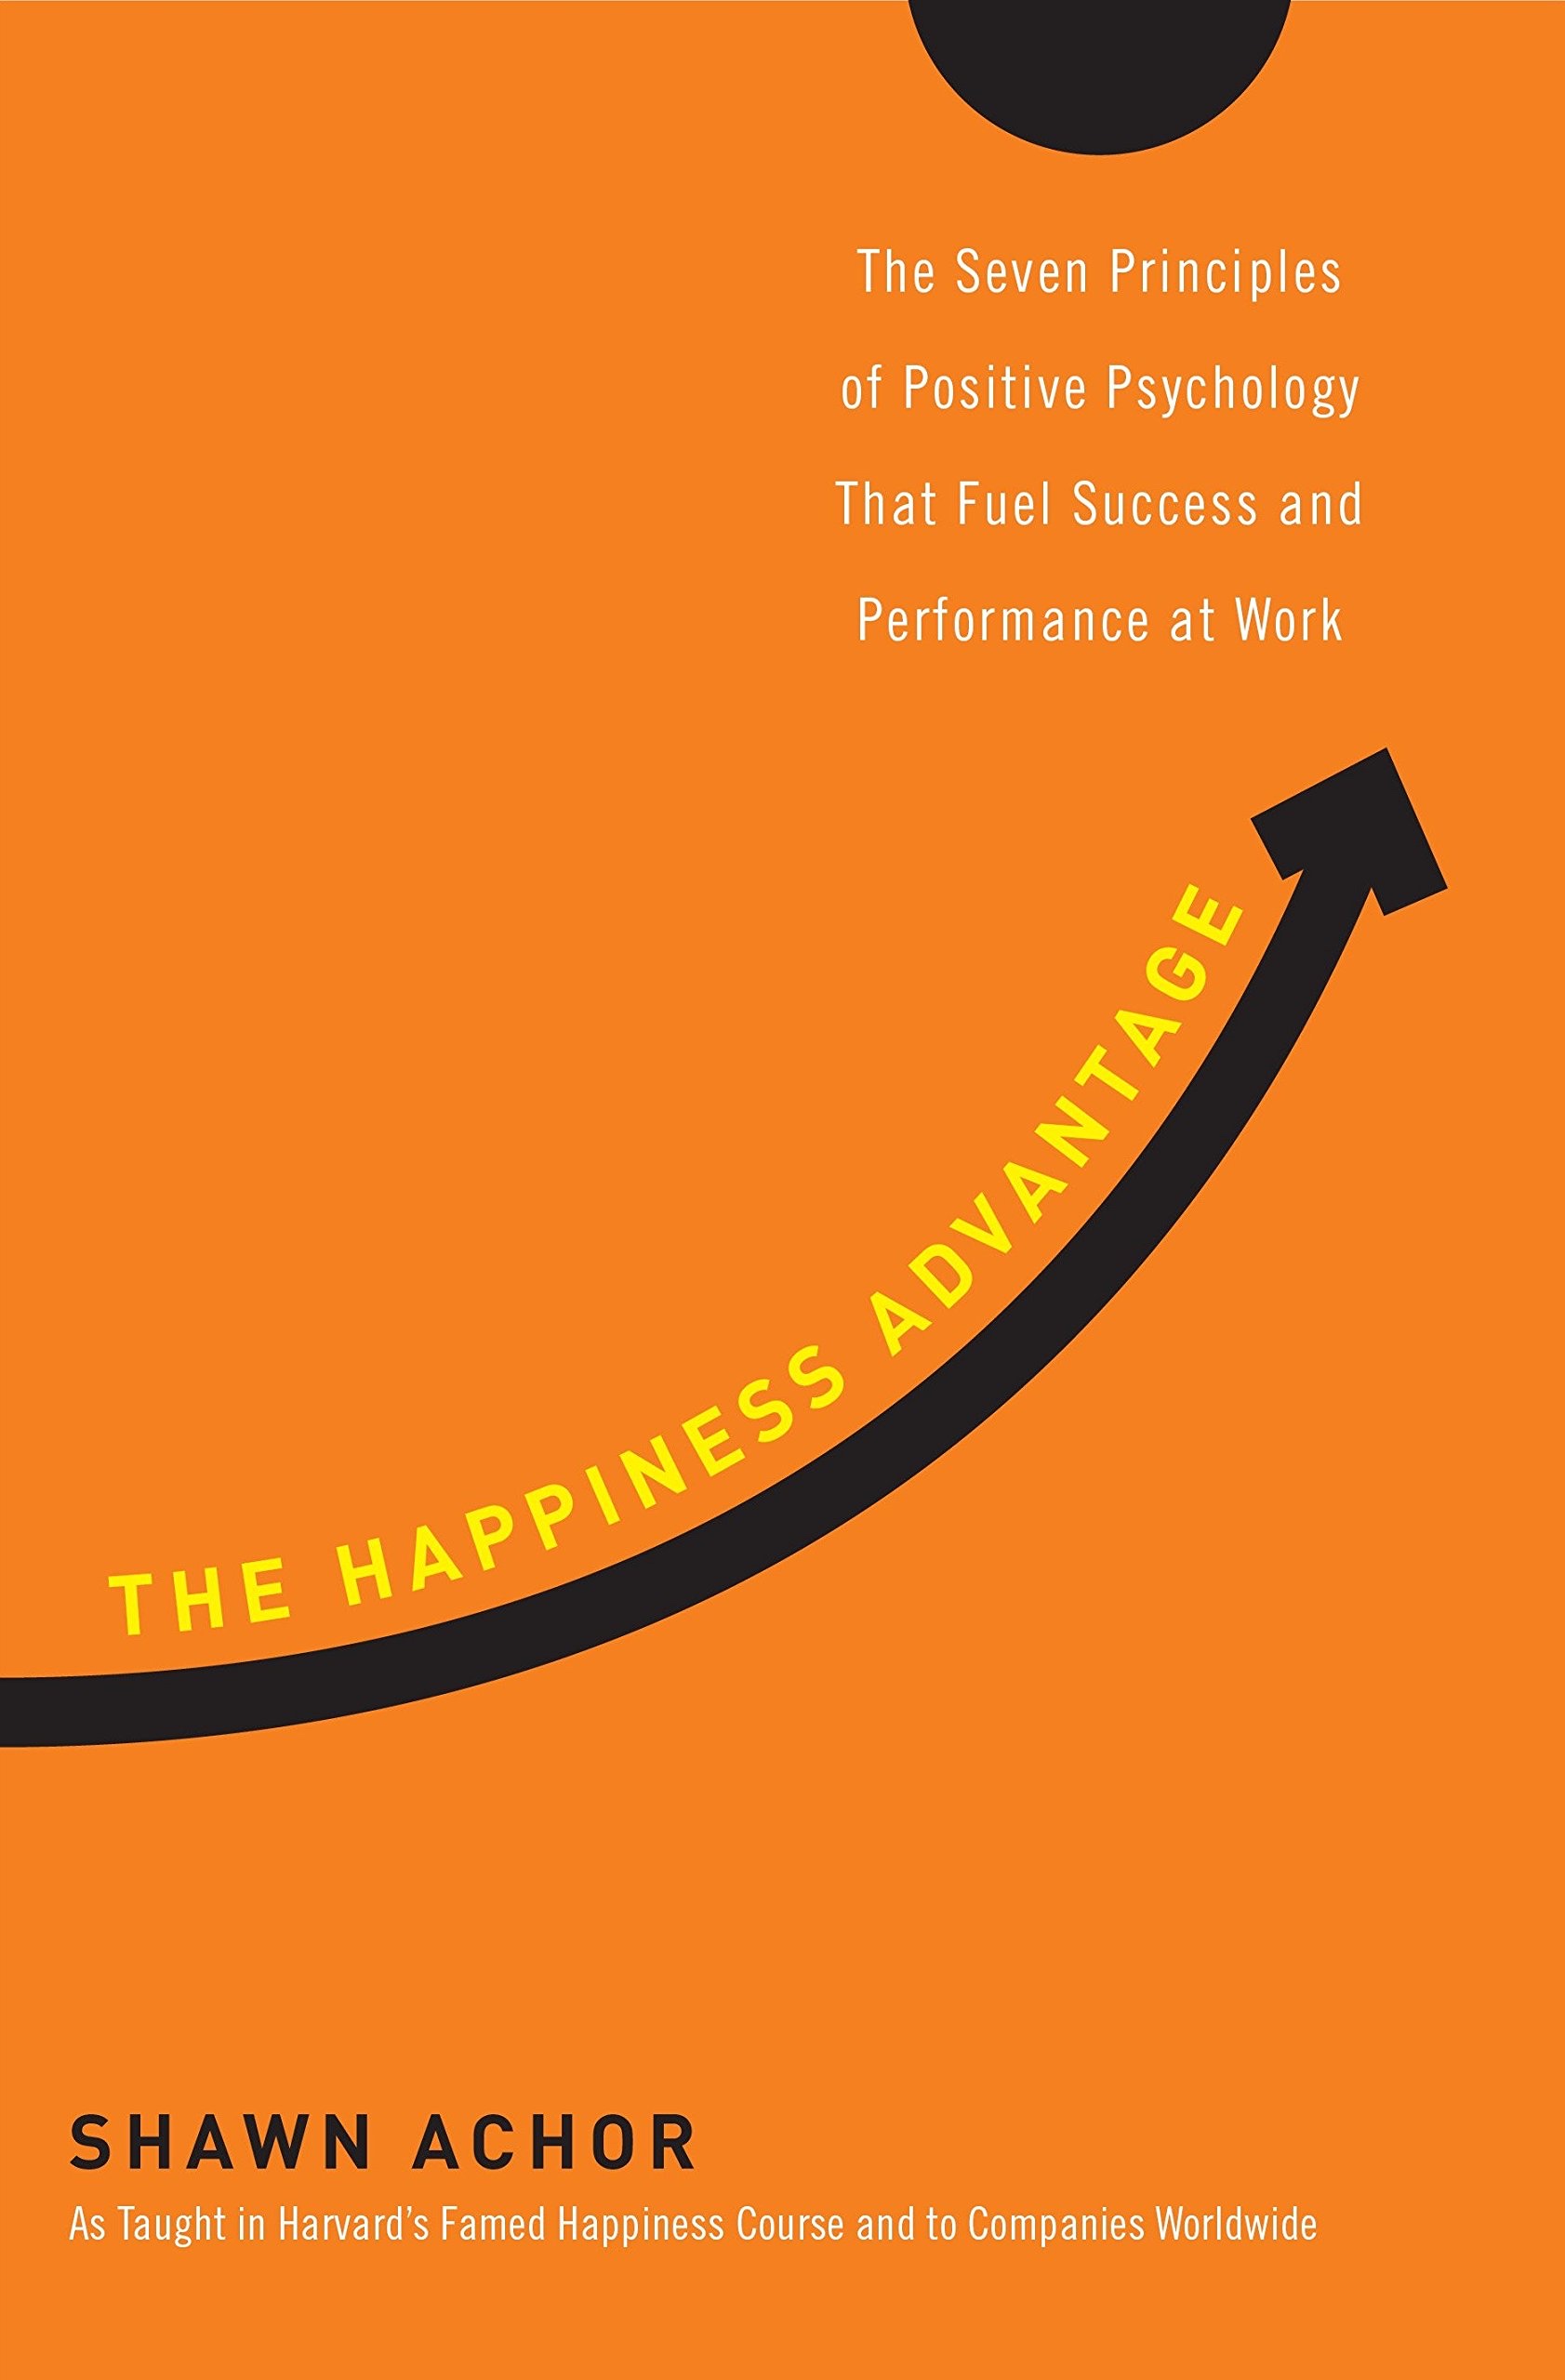 Shawn Achor: The Happinessa Advantage: The Seven Principles of Positive Psychology That Fuel Success and Performance at Work.